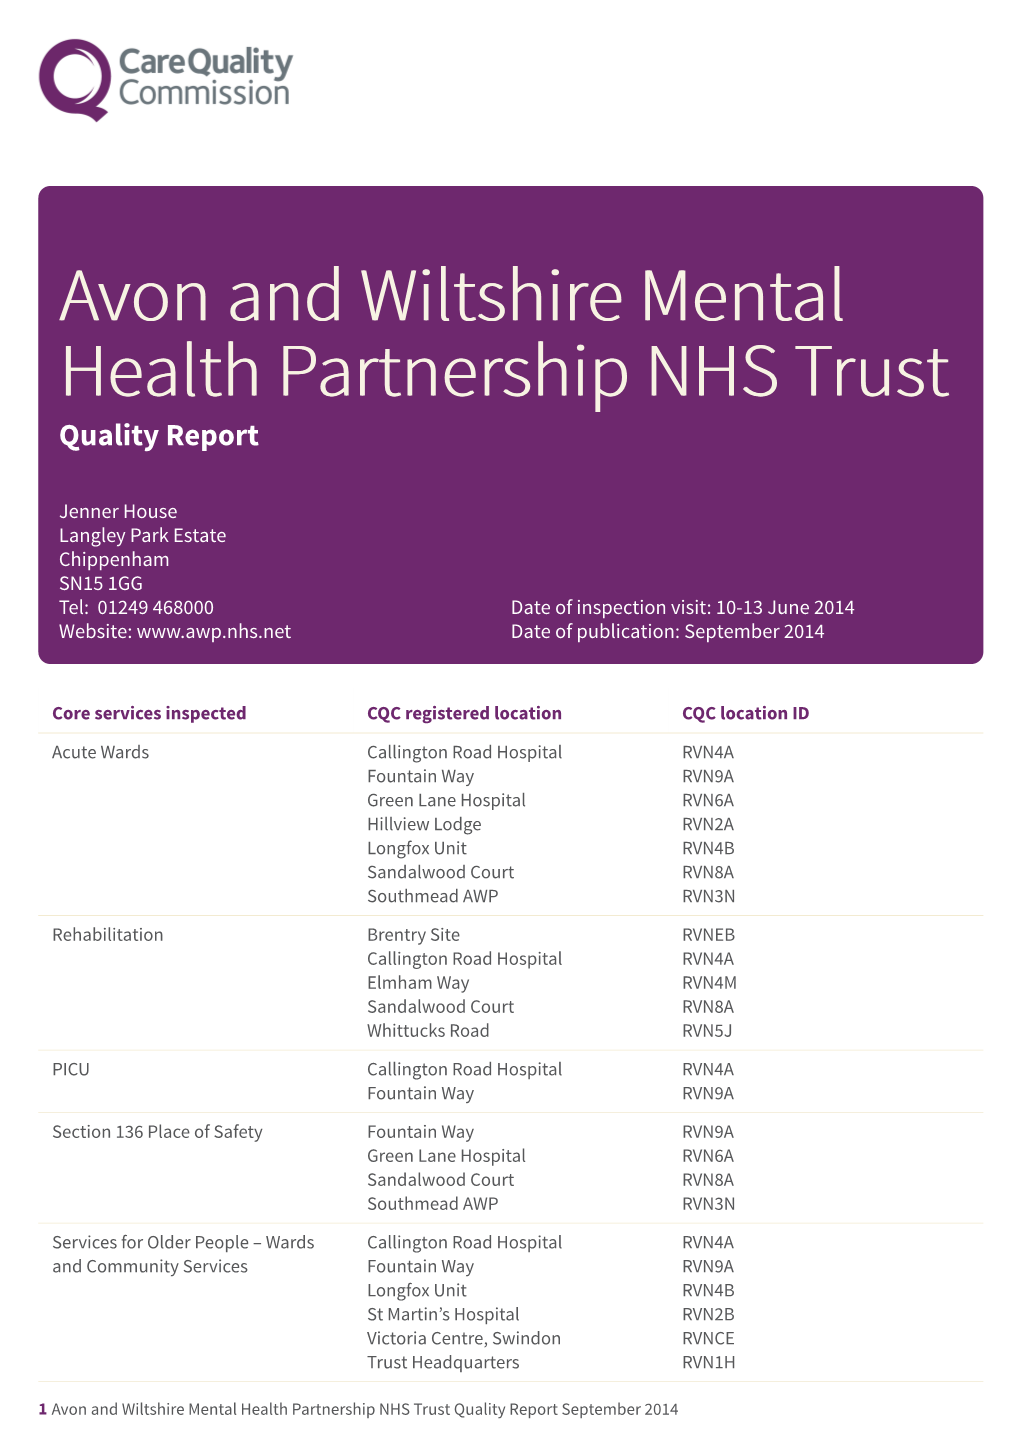 Avon and Wiltshire Mental Health Partnership NHS Trust Scheduled